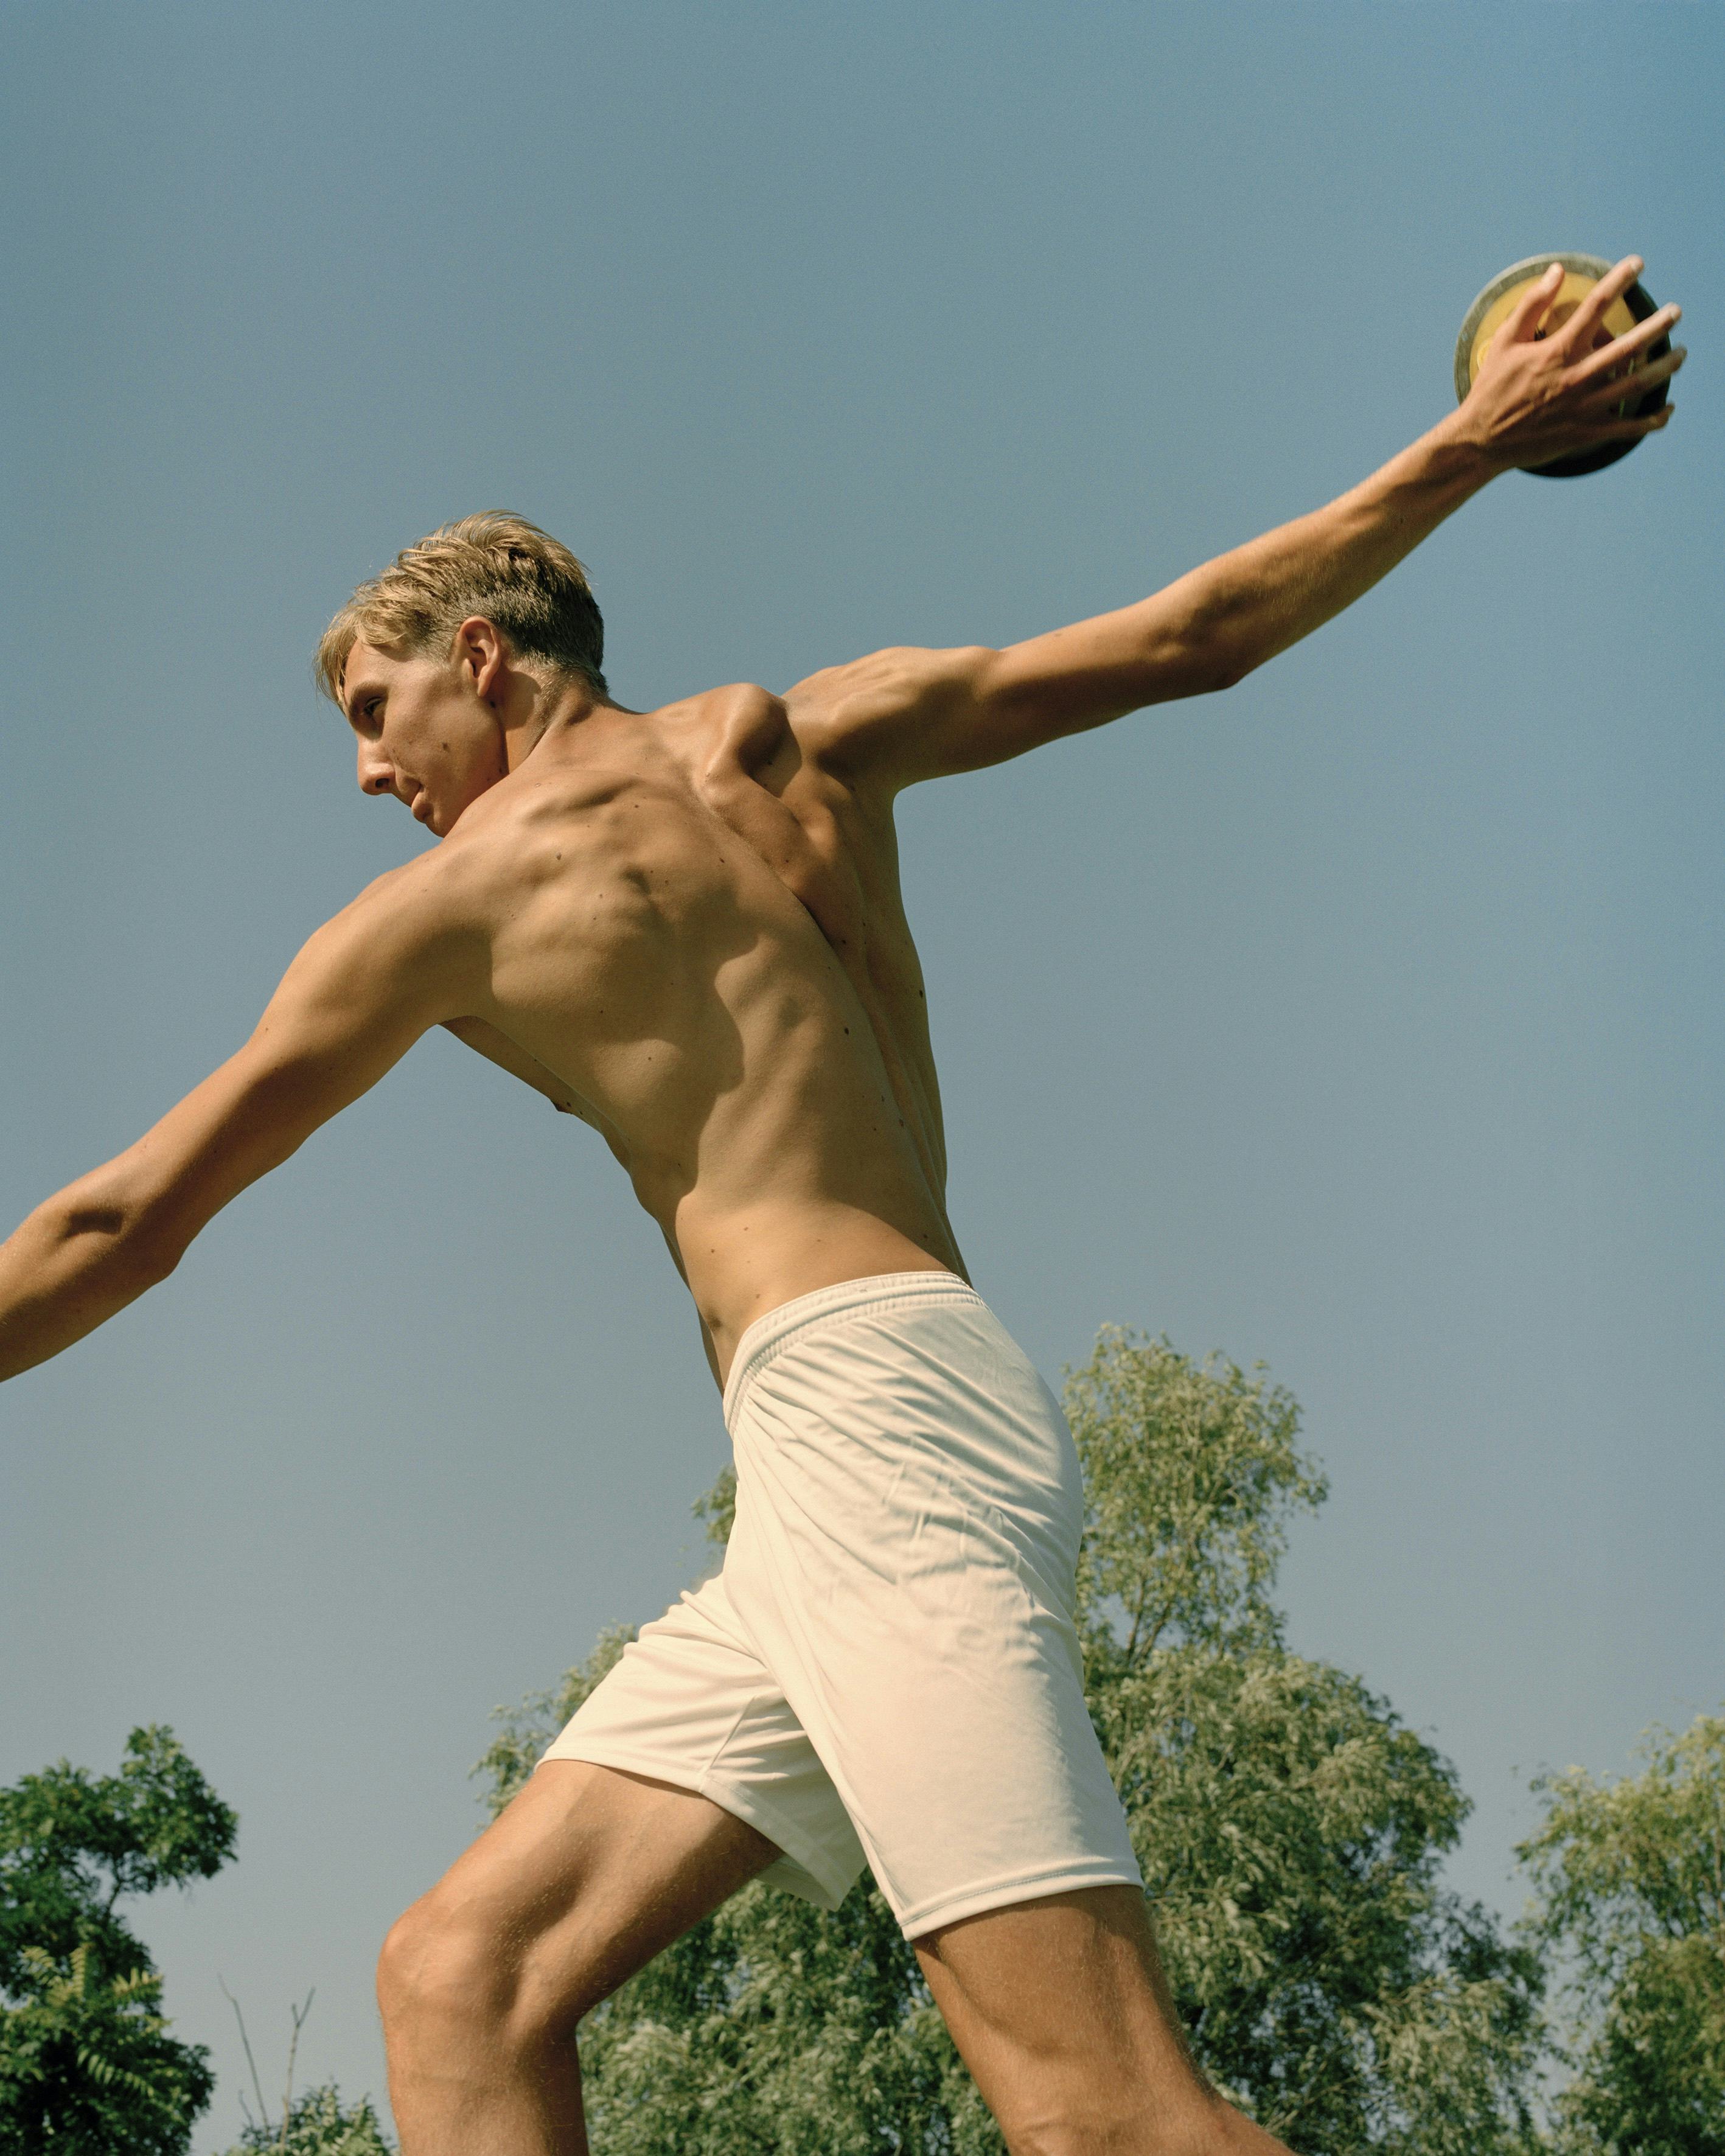 Image of a white man in white shorts throwing a disk